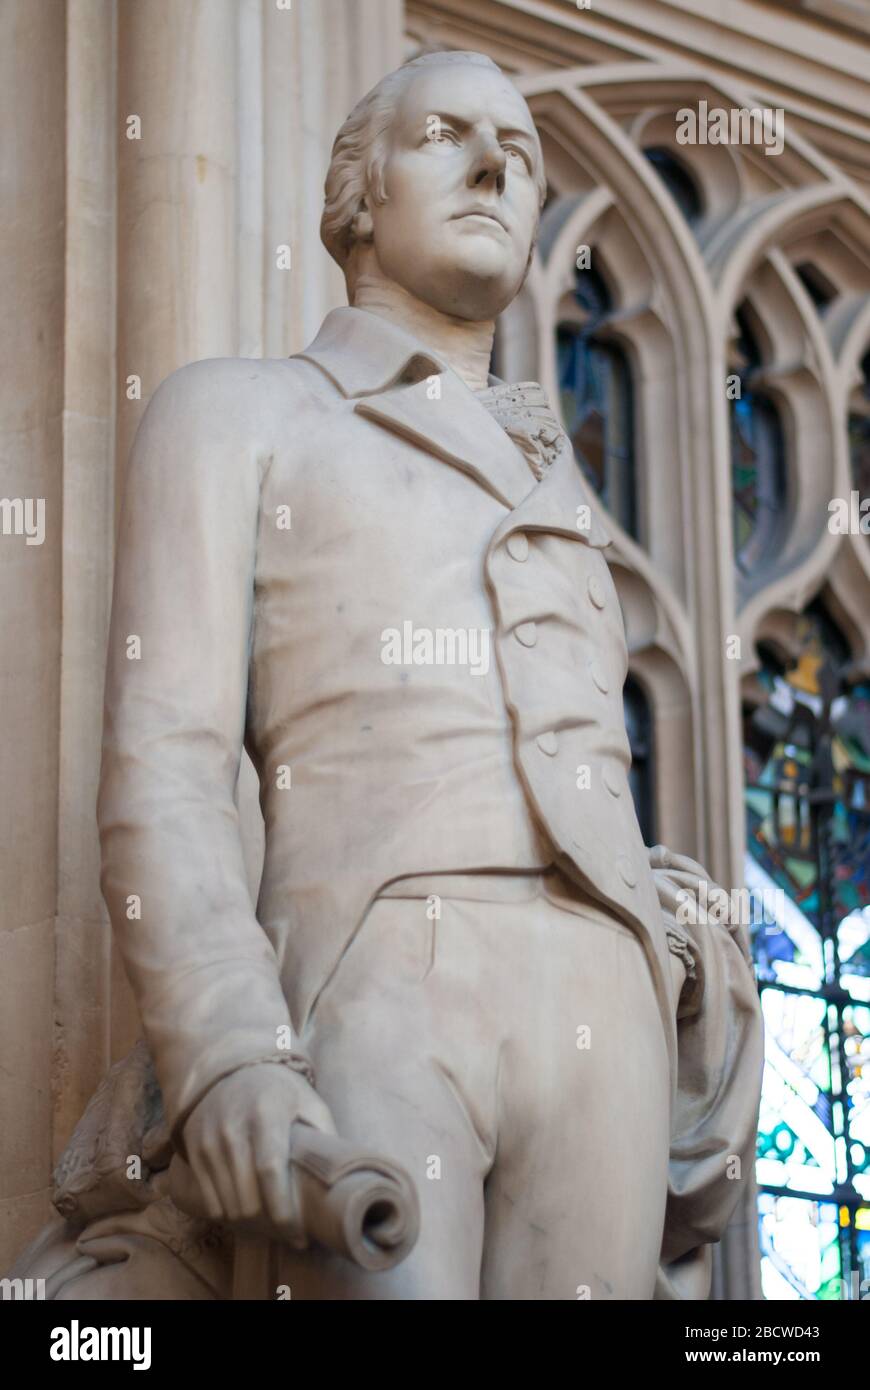 William Pitt Marble statue Westminster Hall, Palace of Westminster, Londra SW1 Foto Stock